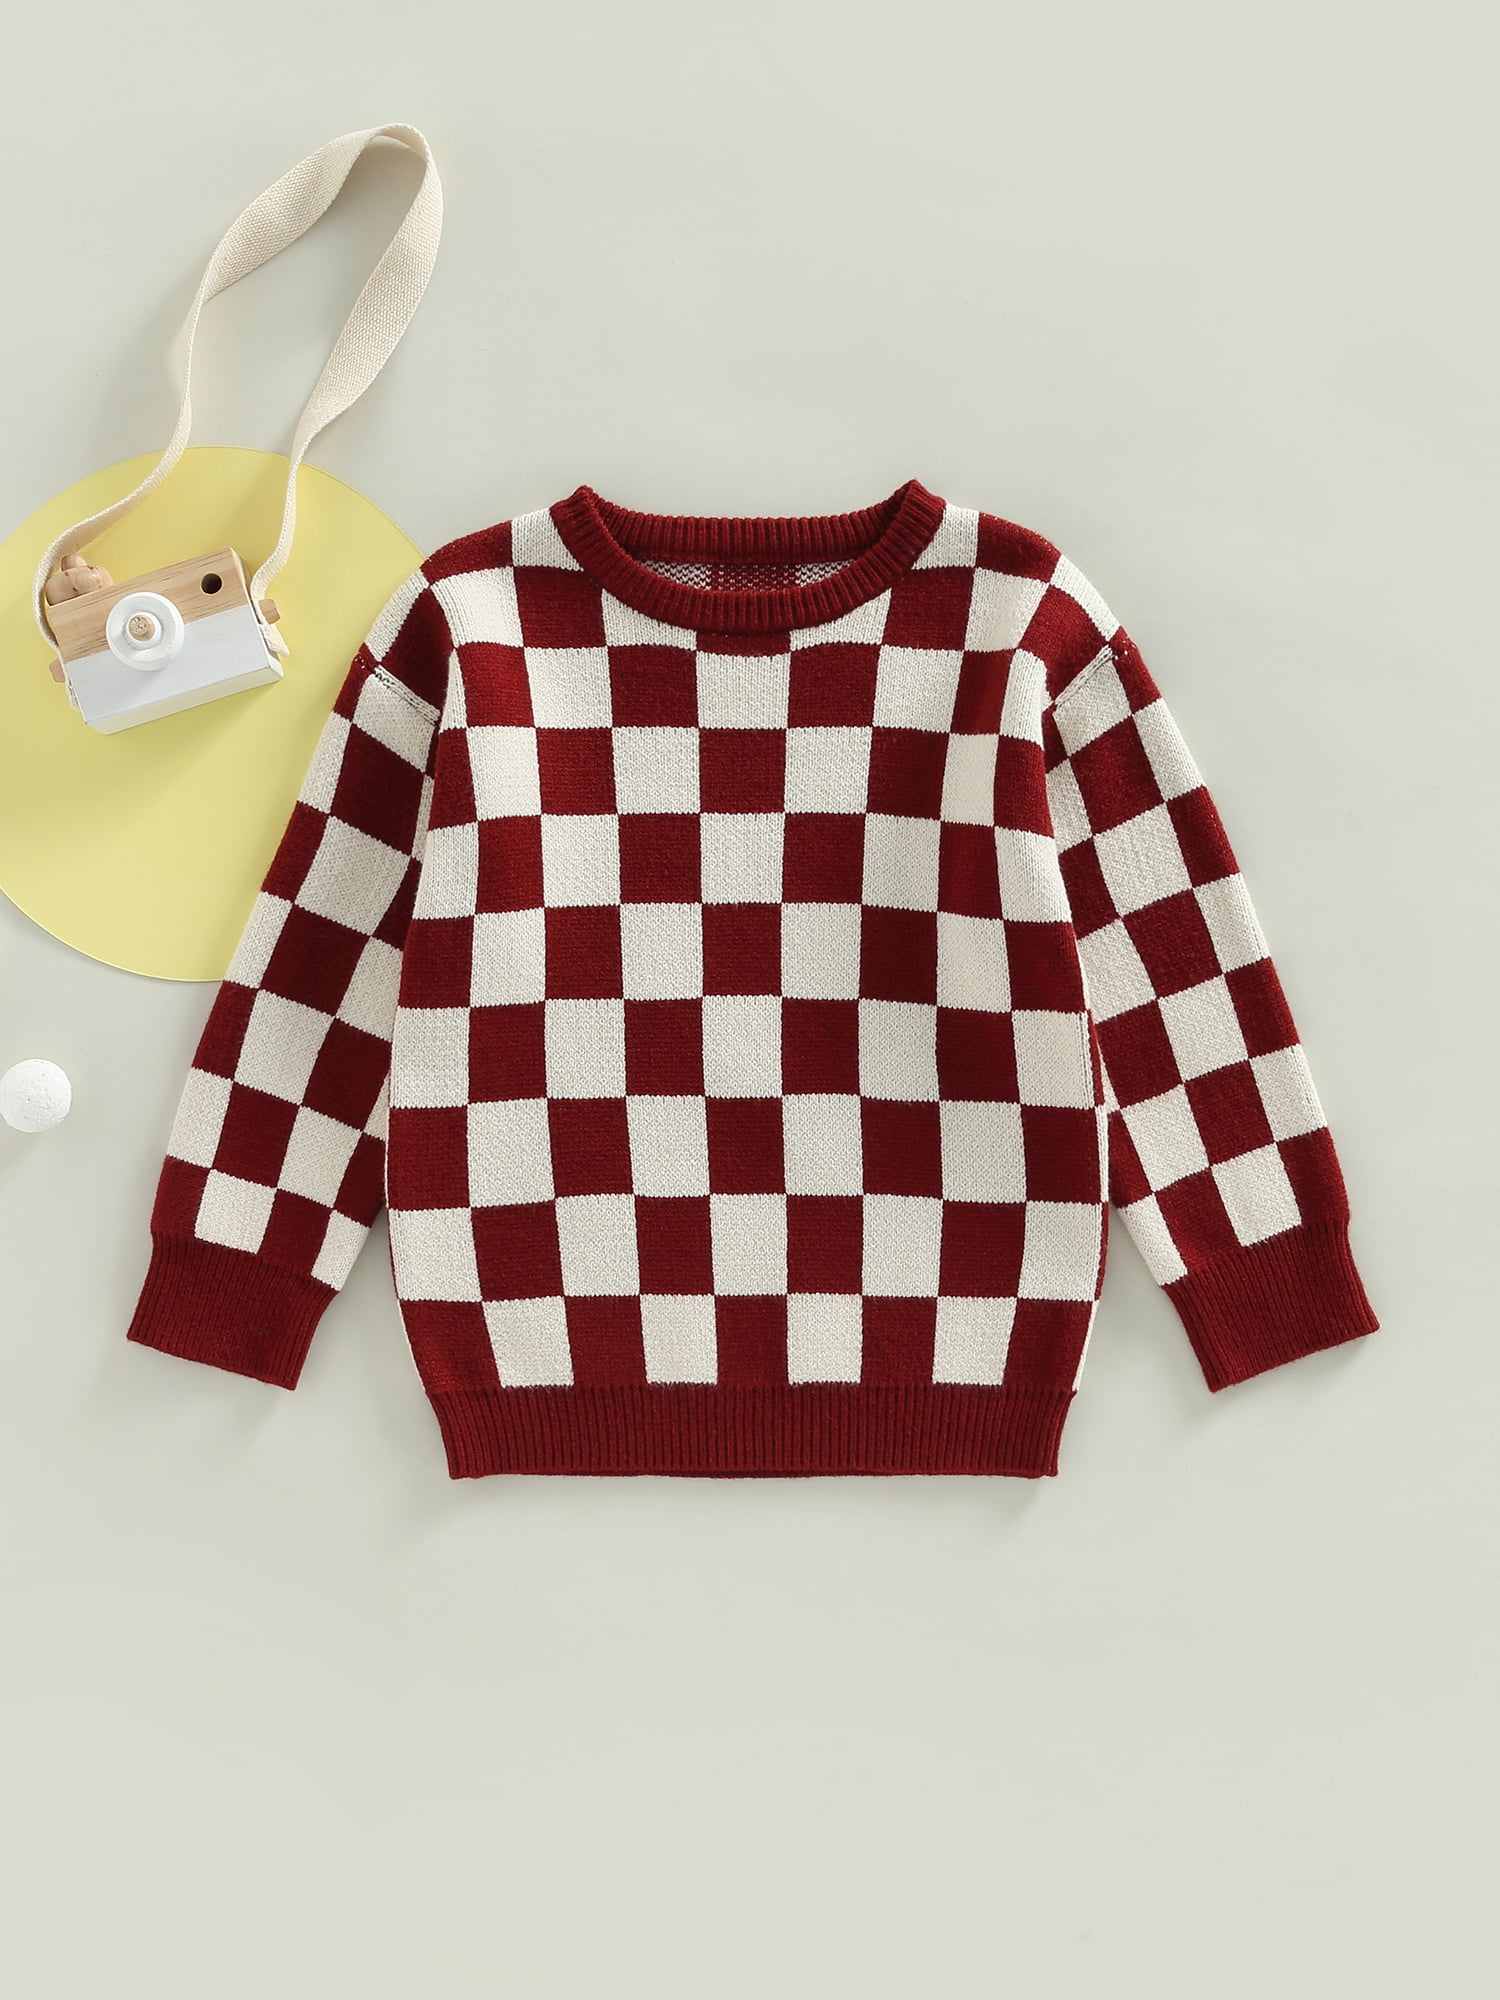 Sayoo Toddler Baby Girls Knit Summer Outfits Checkerboard Plaids Sweater Vest +Drawstring Bloomer Shorts 2pcs Clothes Set